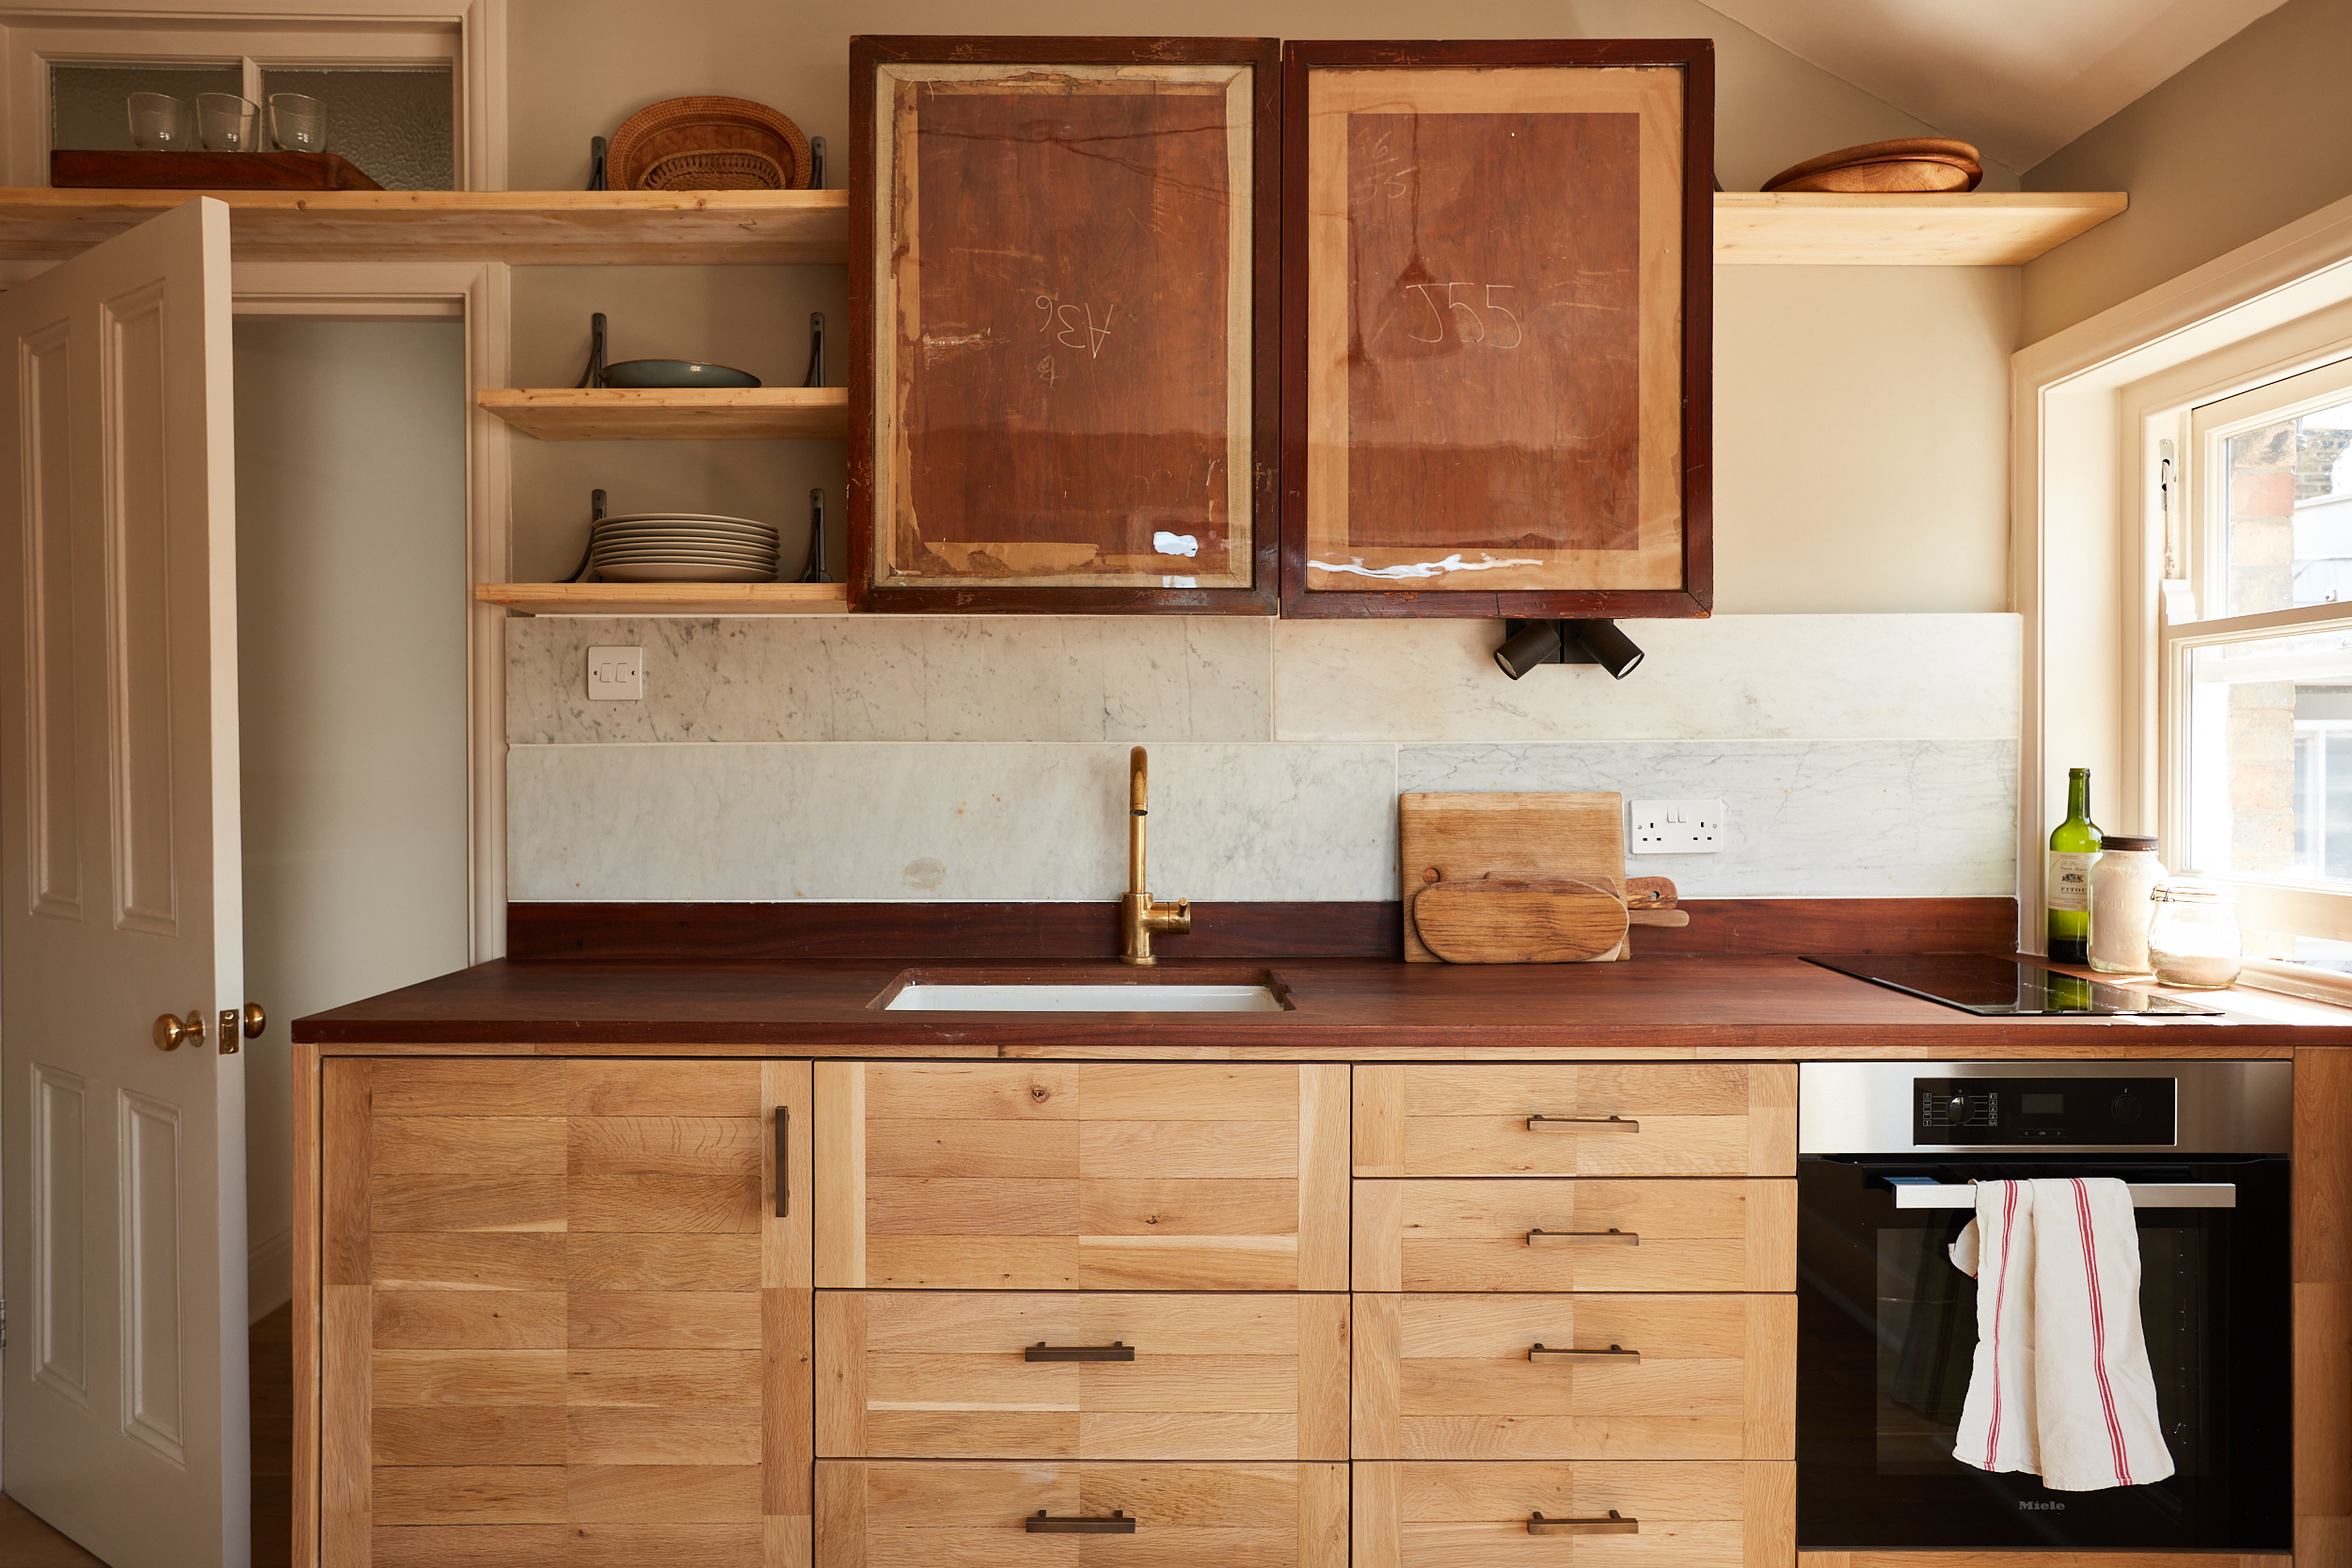 10 Kitchens Designed by Retrouvius from Salvaged Building Materials